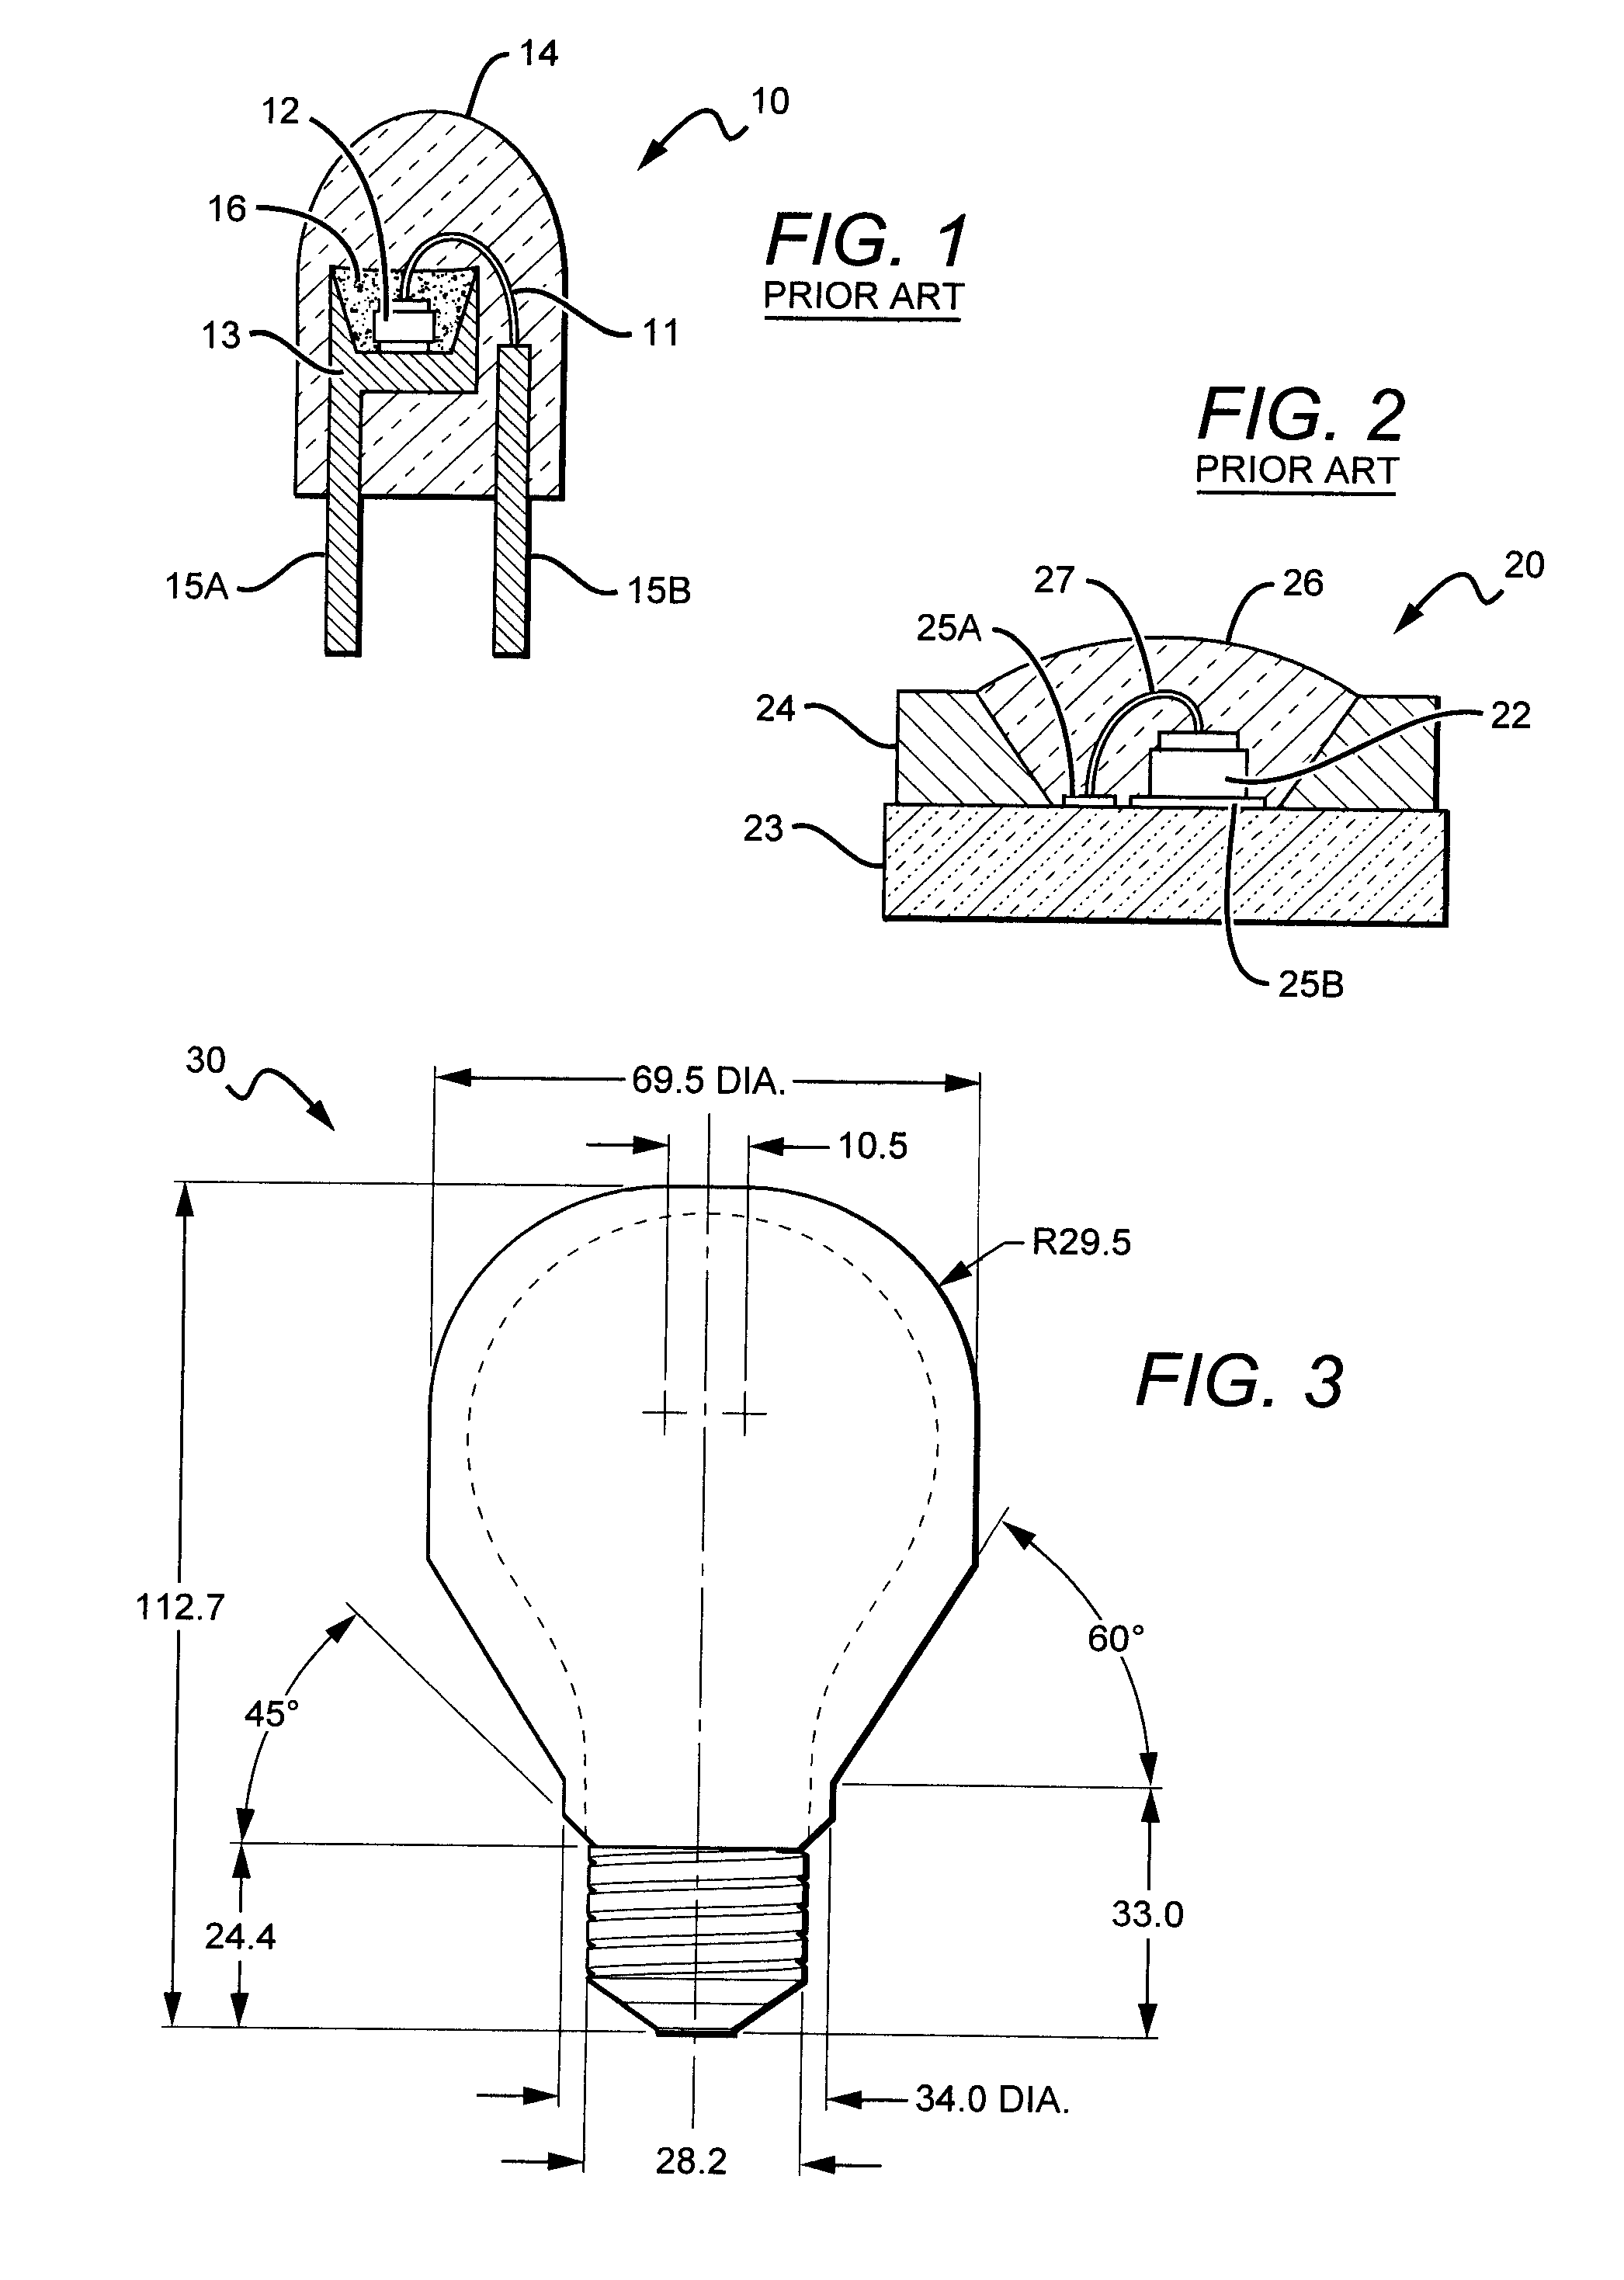 LED lamp or bulb with remote phosphor and diffuser configuration with enhanced scattering properties